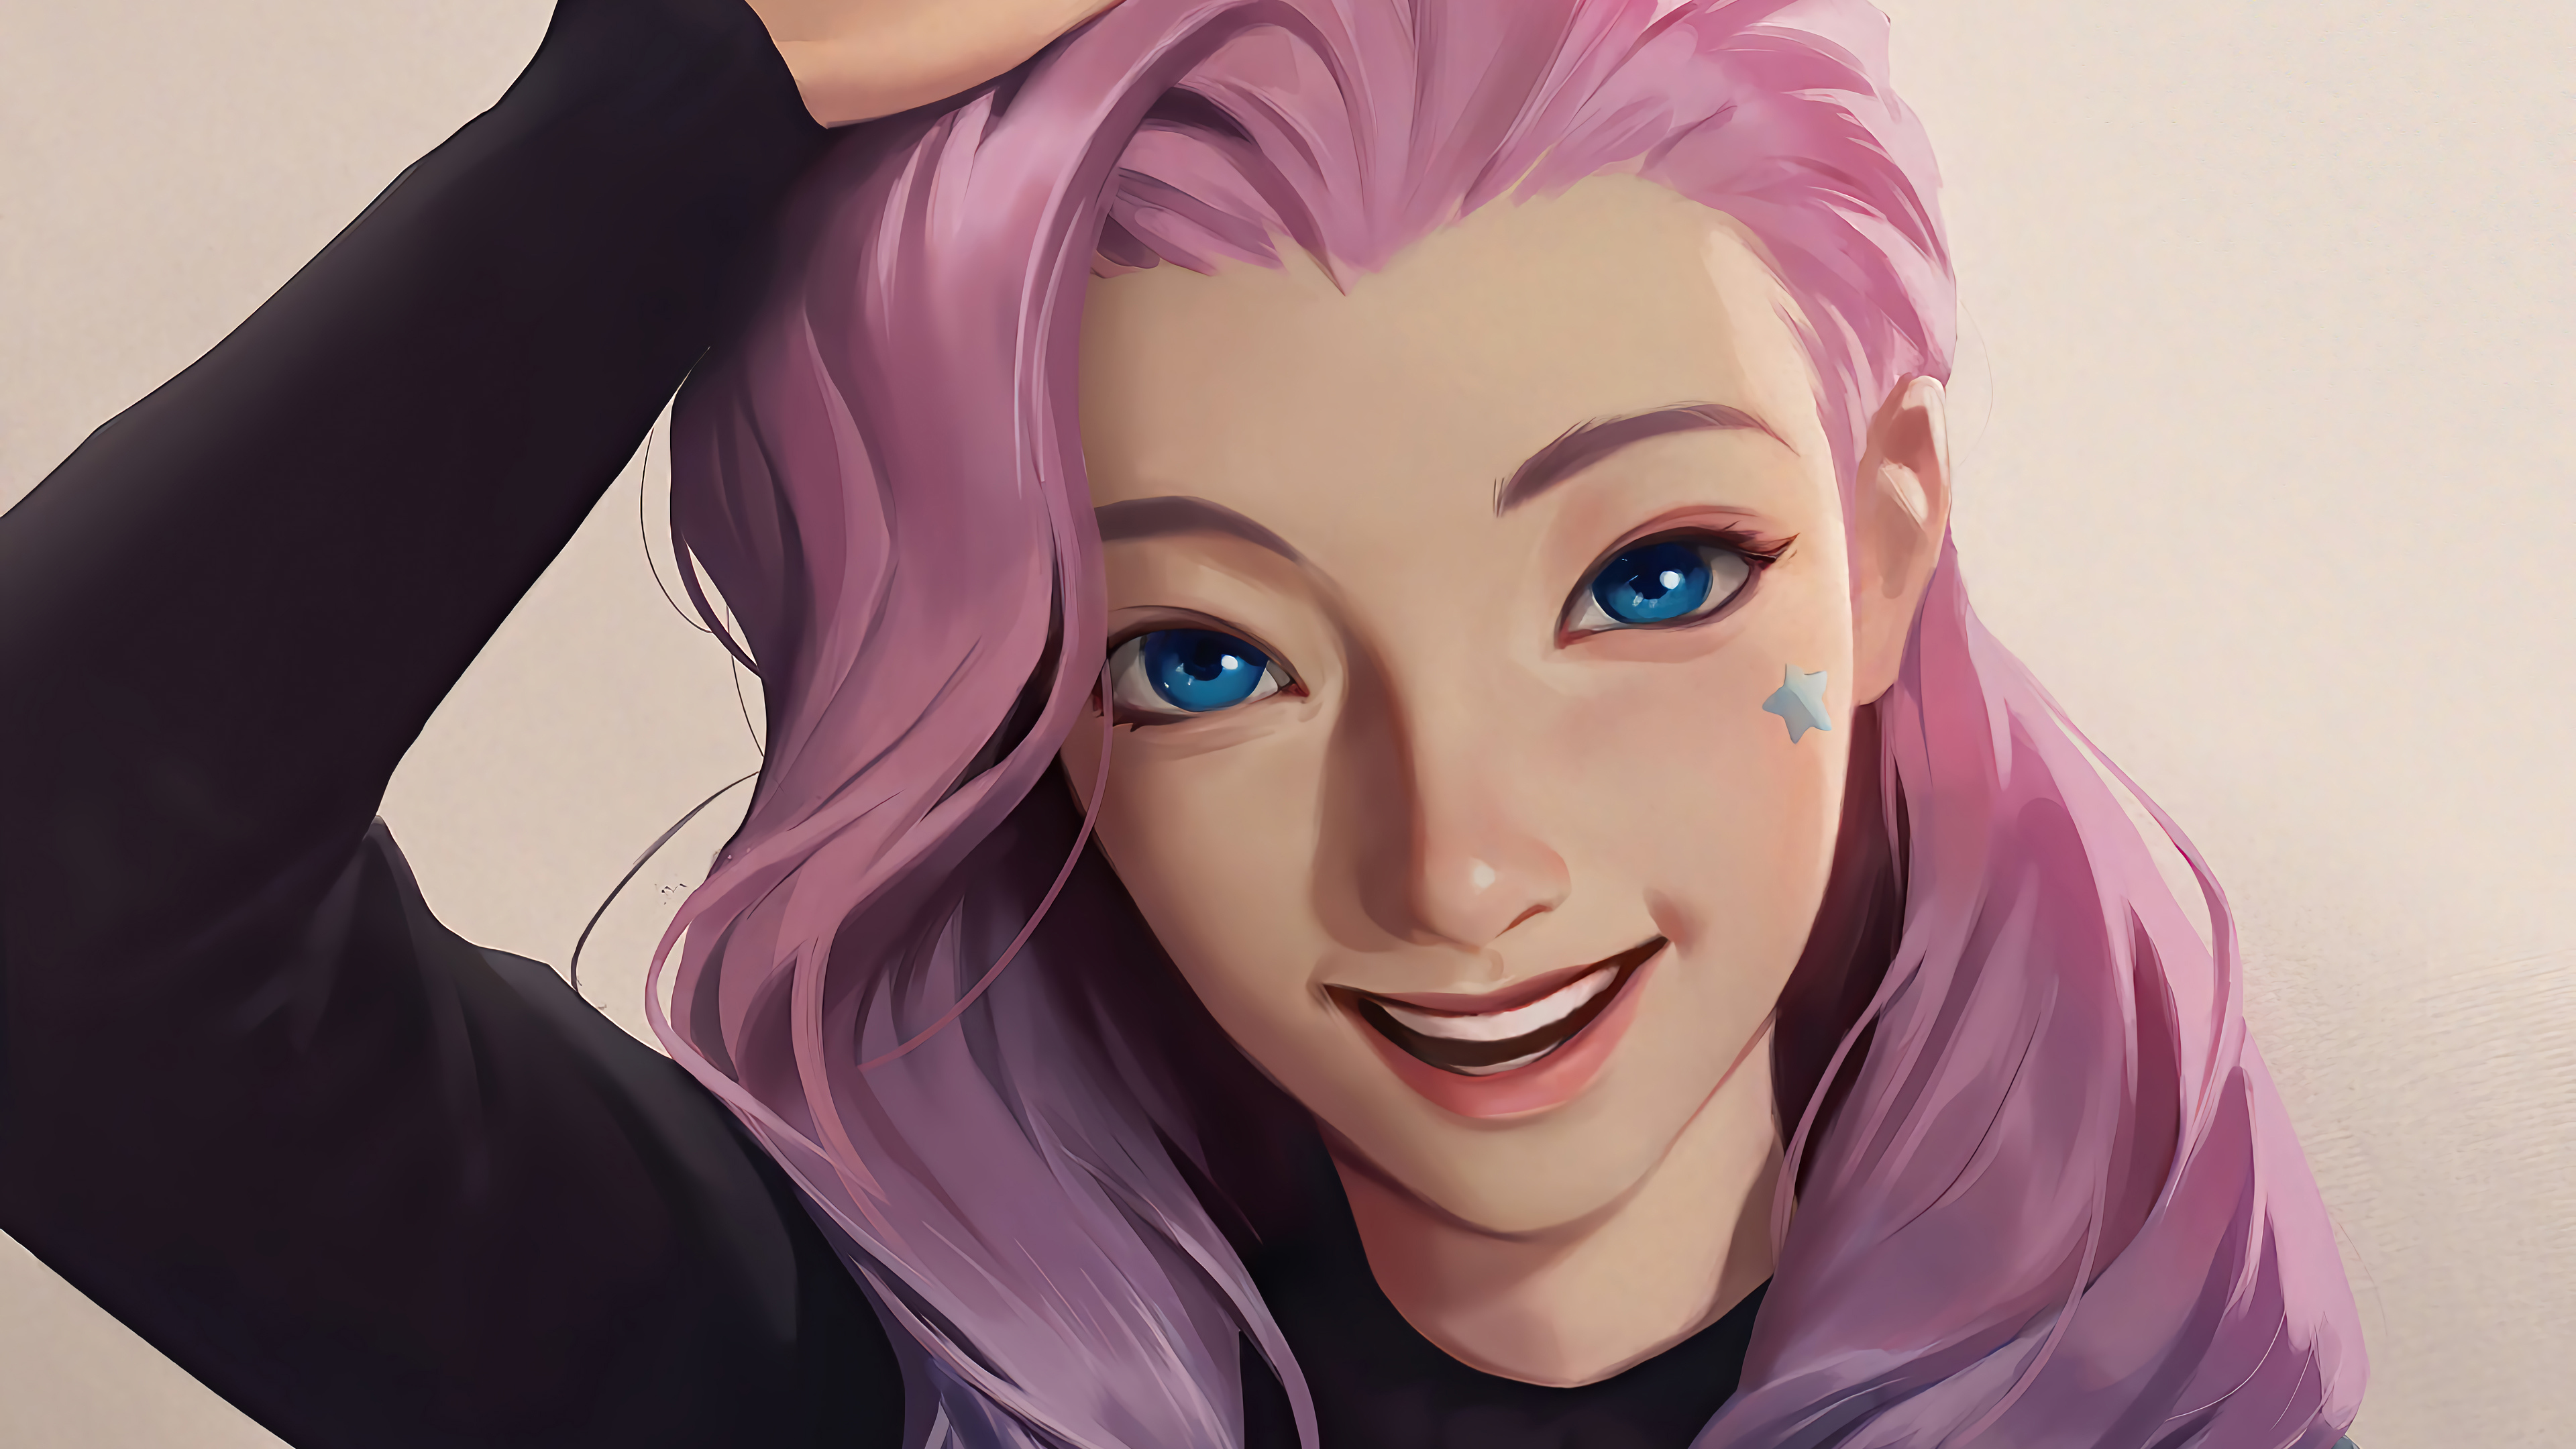 Seraphine League Of Legends Seraphine League Of Legends Pink Hair Blue Eyes Icon Looking At Viewer 3840x2160